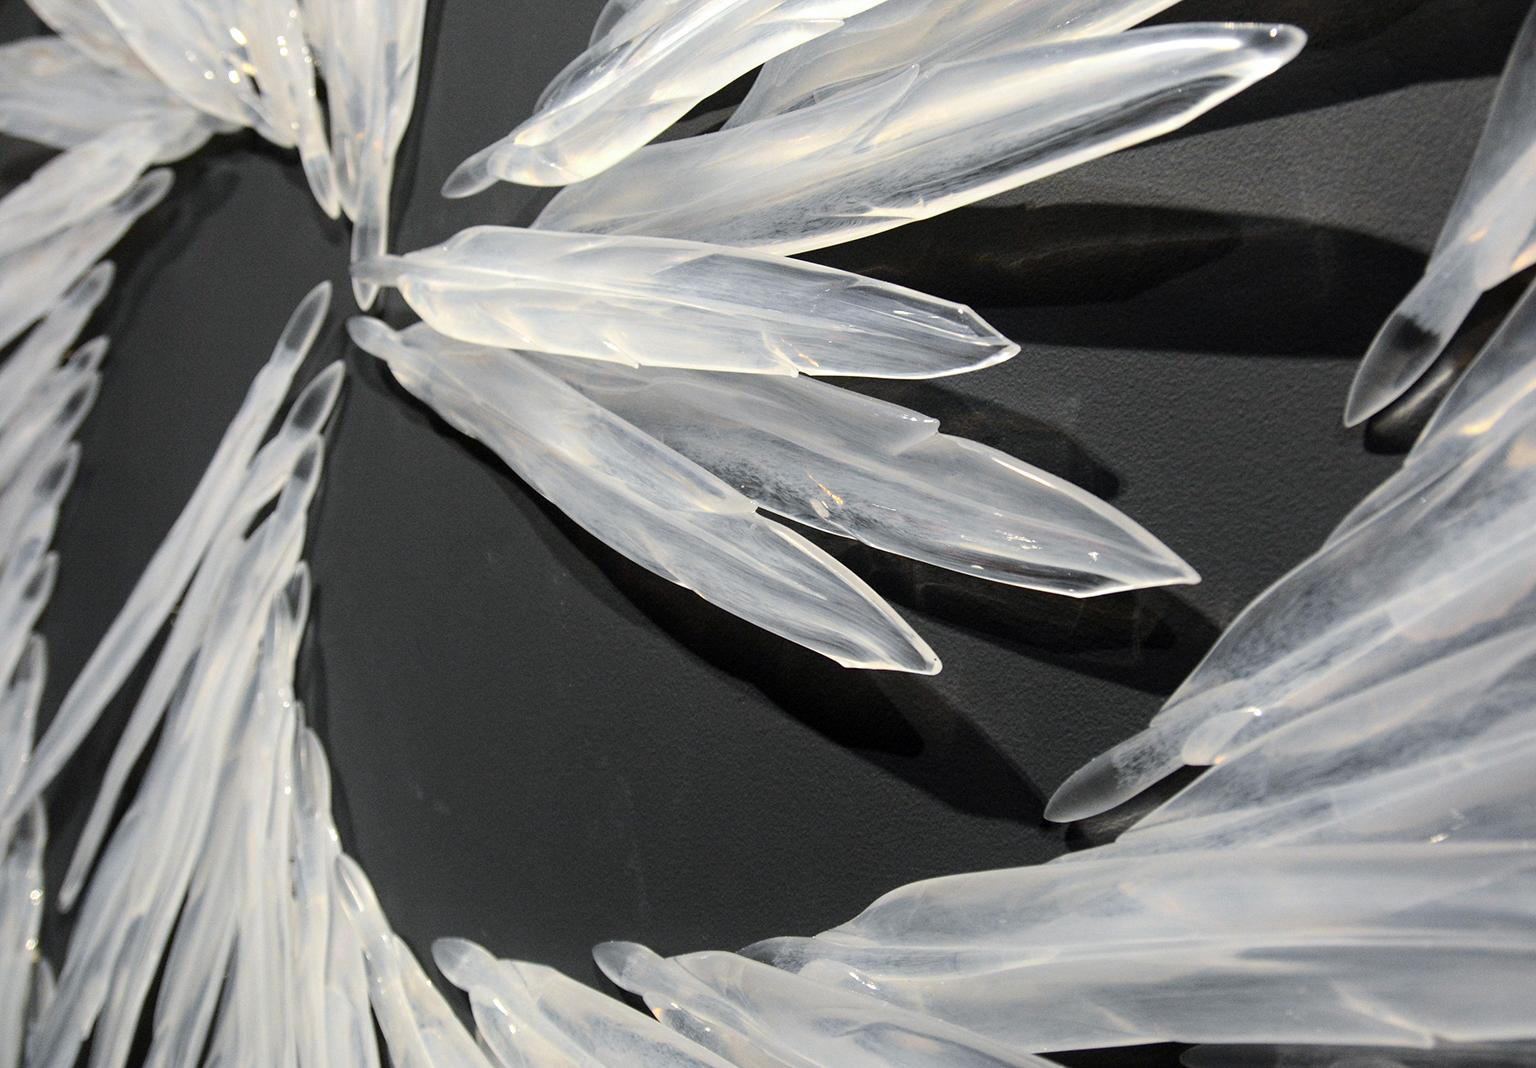 This exquisite glass wall sculpture extends almost 60 inches across. It was featured in Robinson's solo exhibition at the Canadian Clay and Glass Gallery. It evokes a remarkable sense of movement, both through the imagery of the feathers flying in a